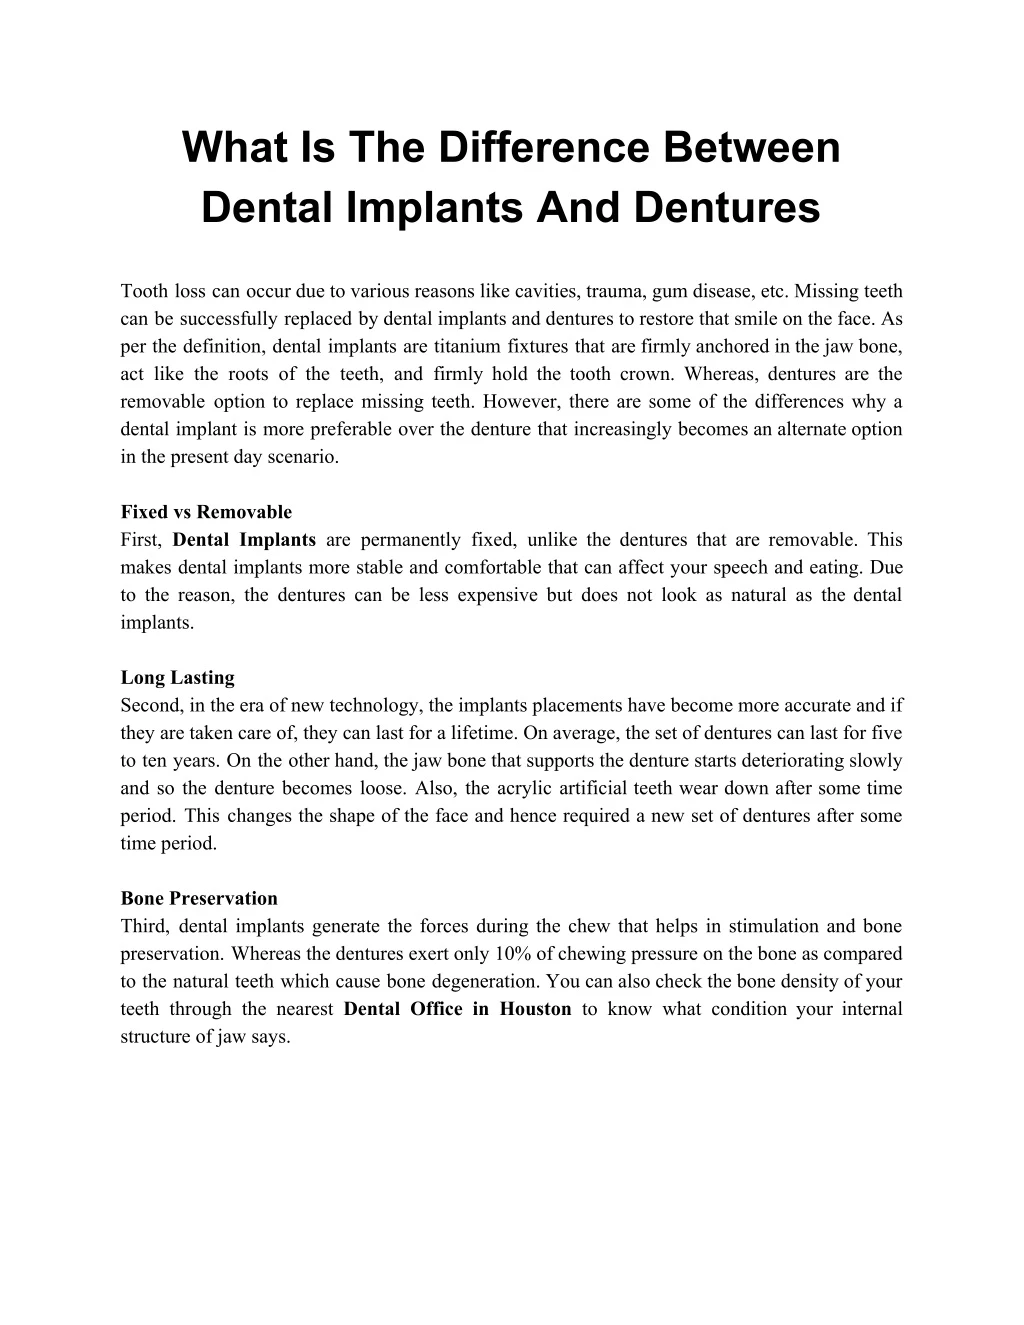 what is the difference between dental implants